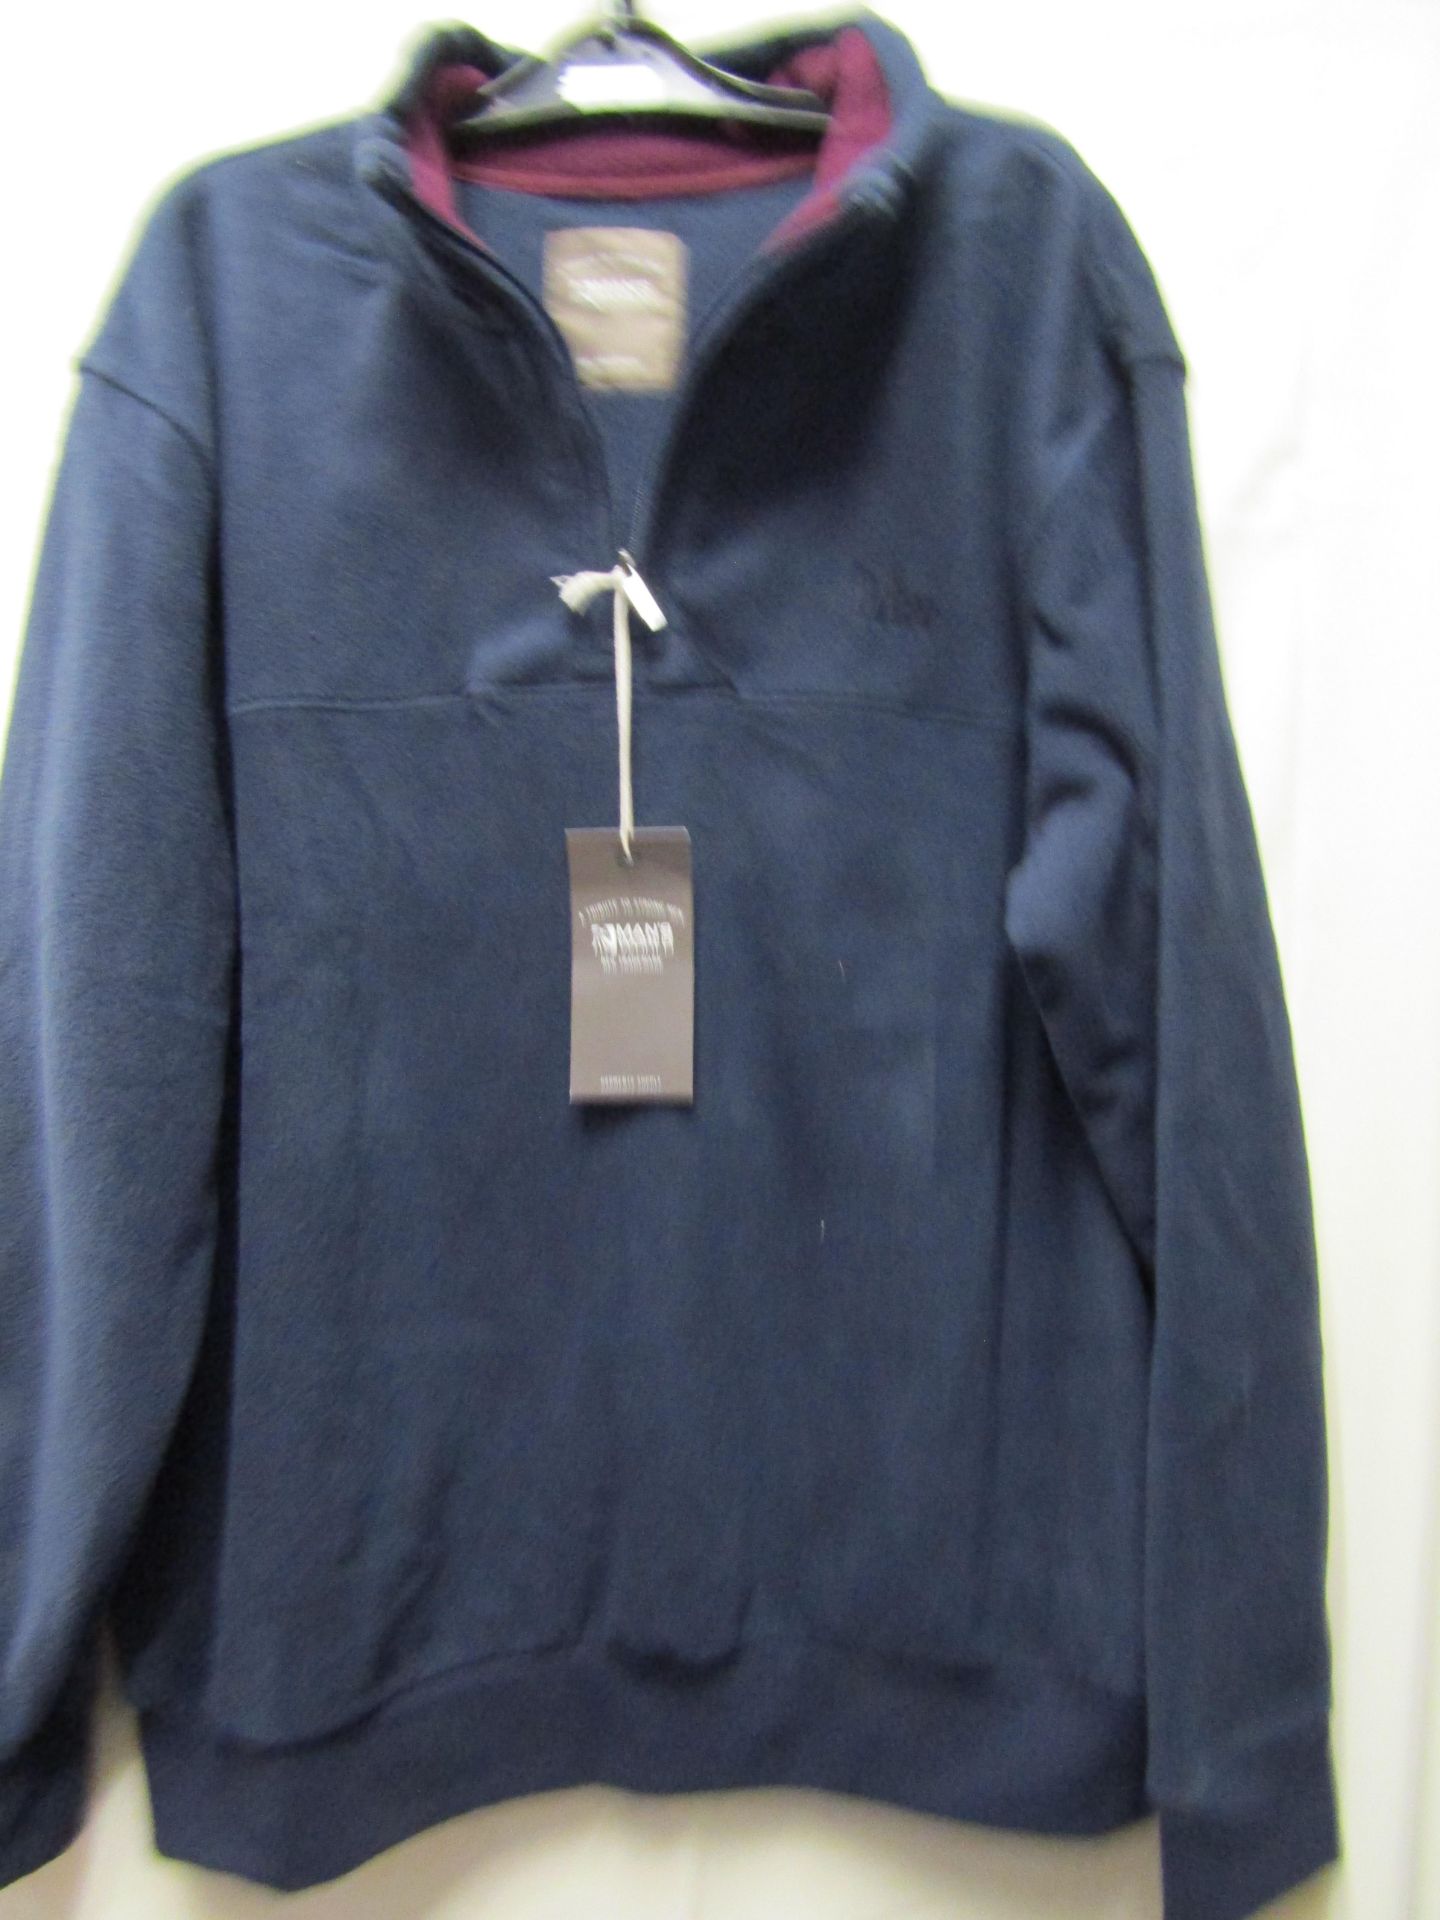 Mans World Navy Fleece Size XXL new With Tags